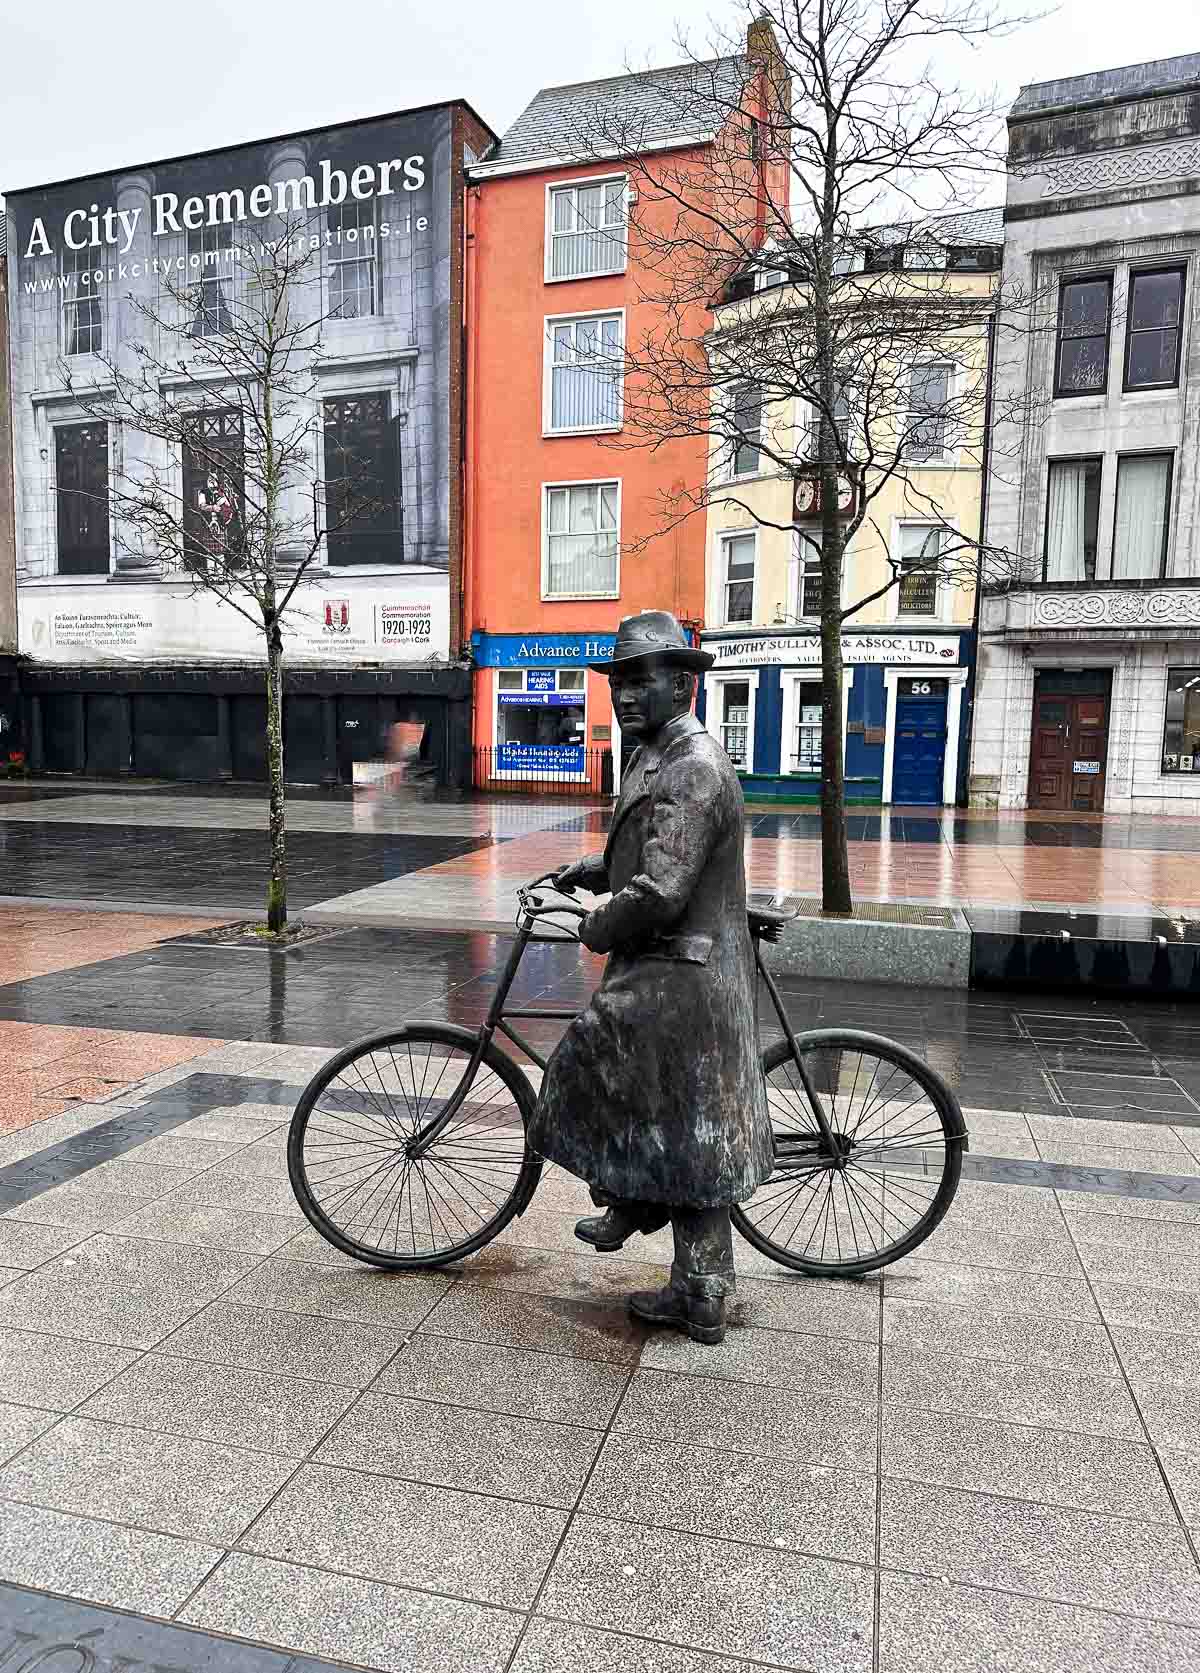 Things to do in Cork, Ireland - statue